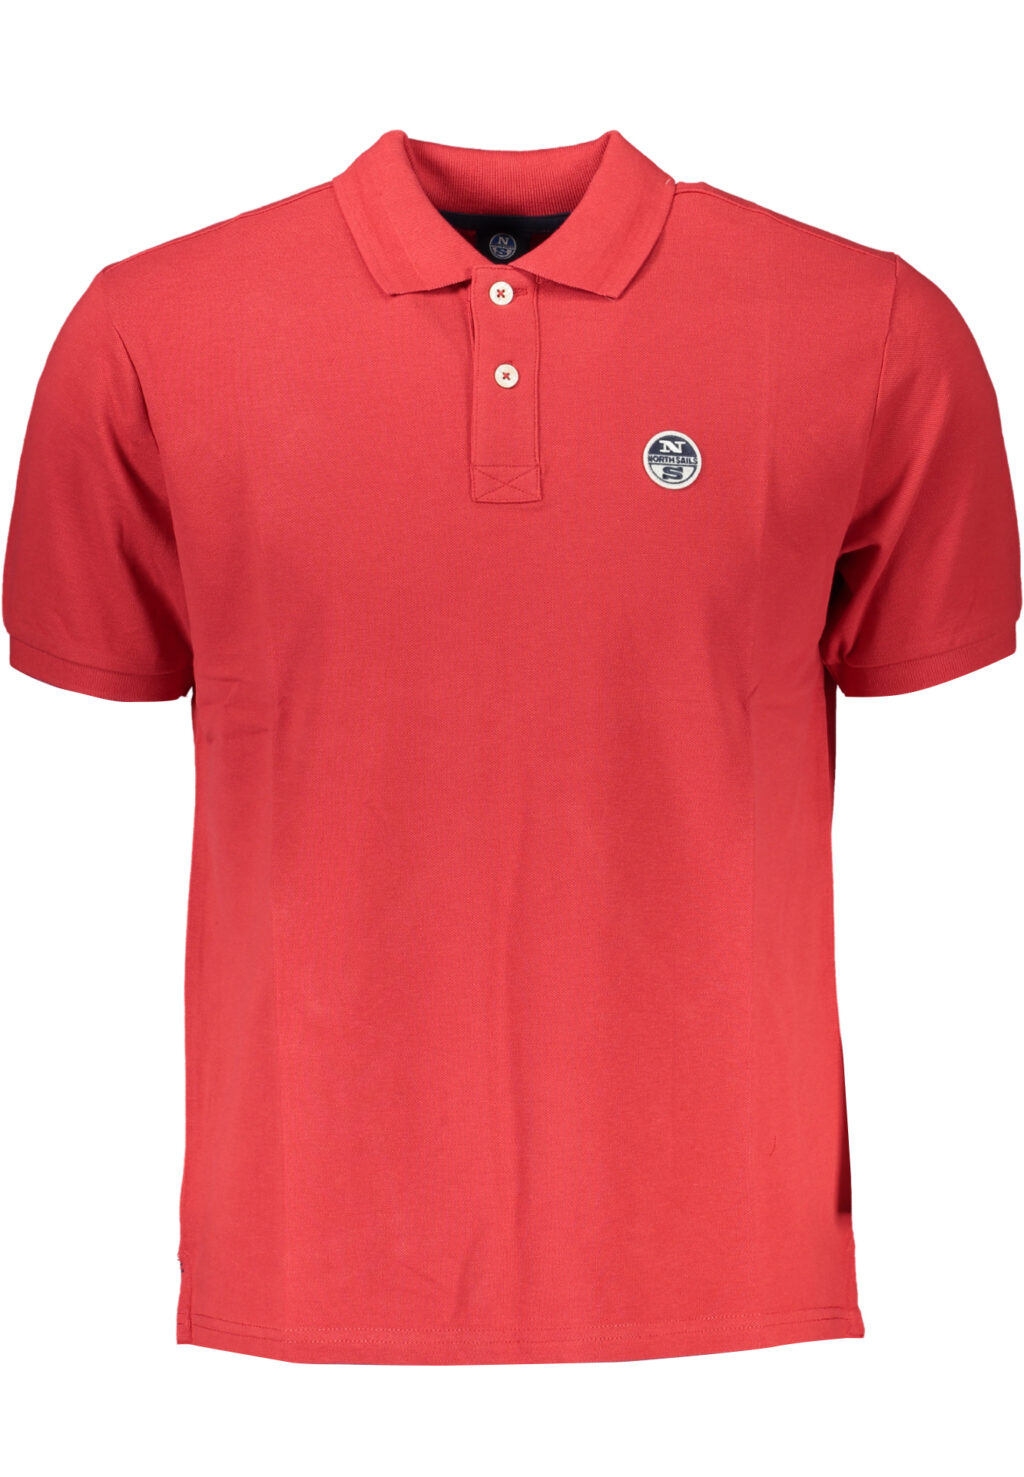 NORTH SAILS MEN'S RED SHORT SLEEVED POLO SHIRT 902826000_RO0230